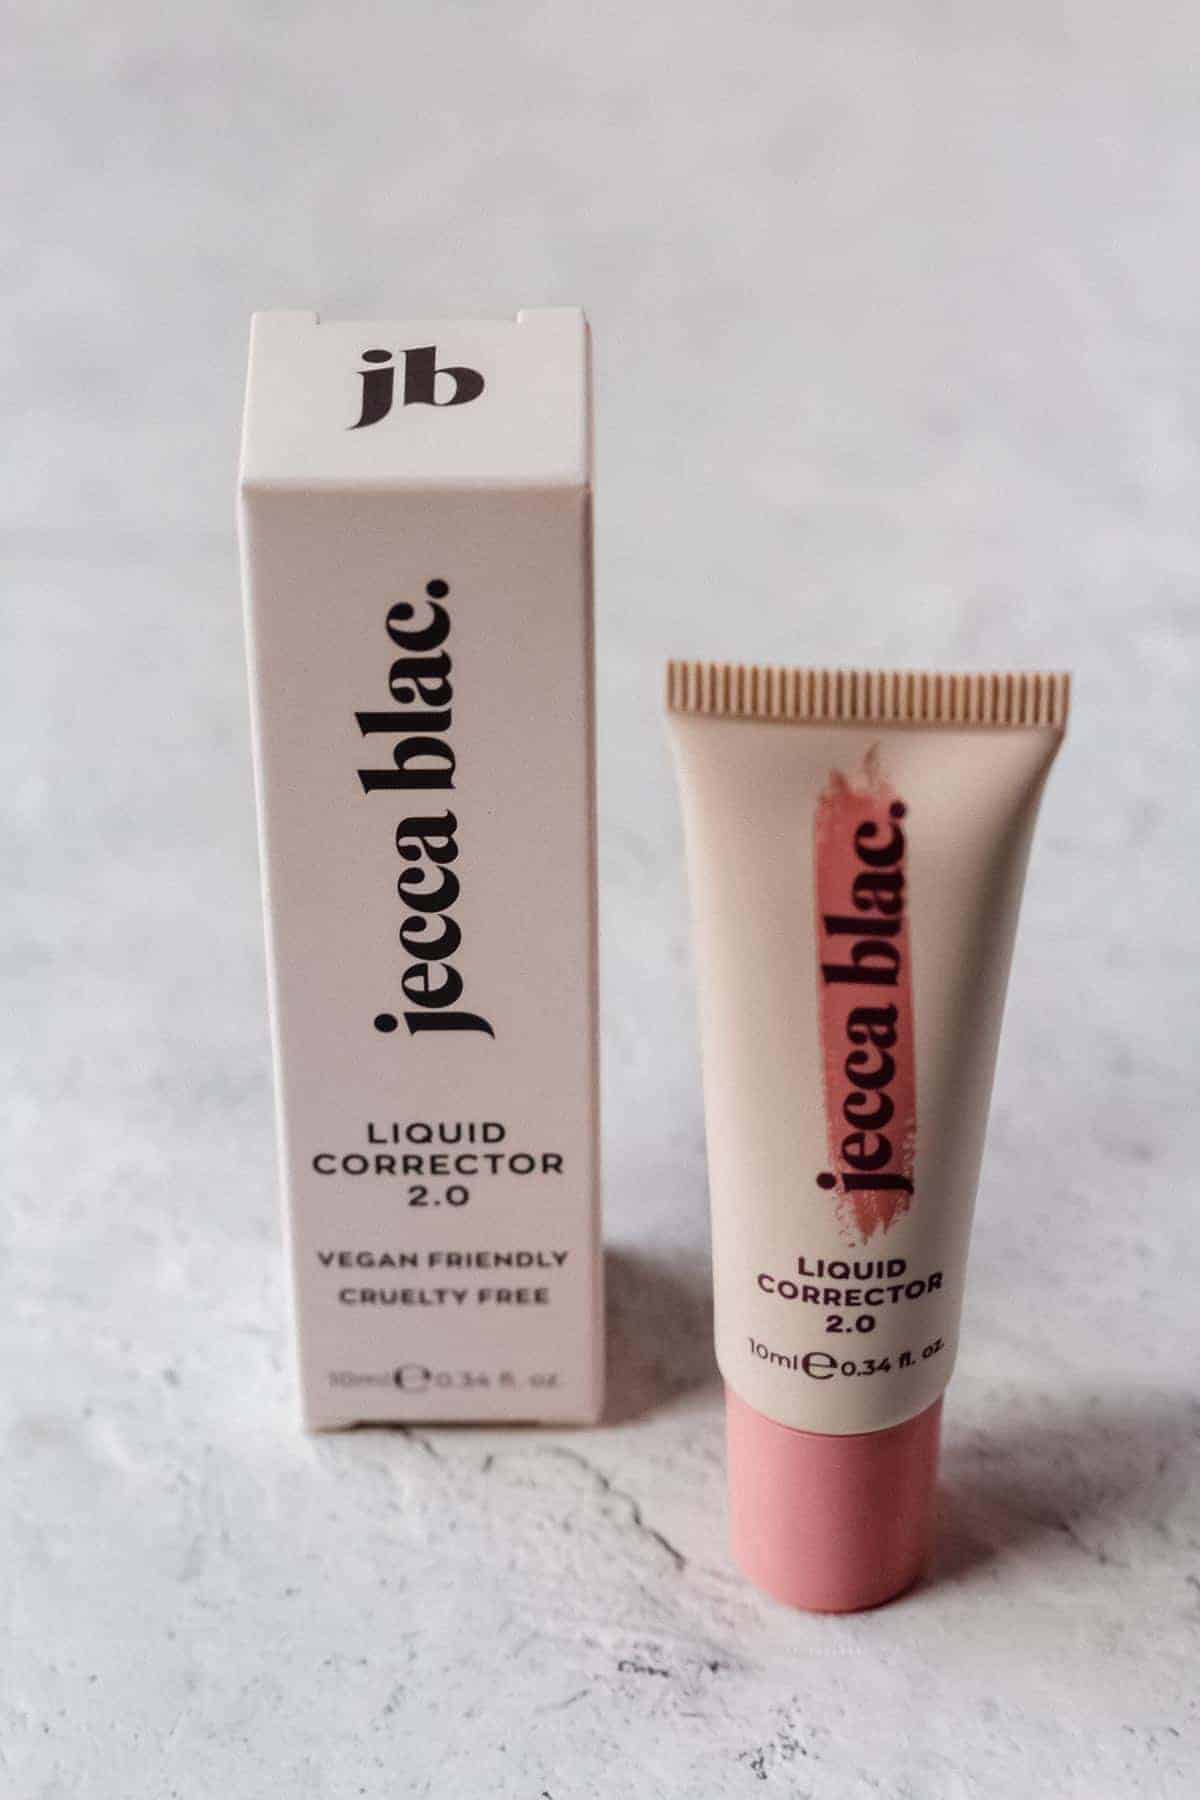 Jessica Blac Liquid Color Corrector 2.0 tube and box on a white background